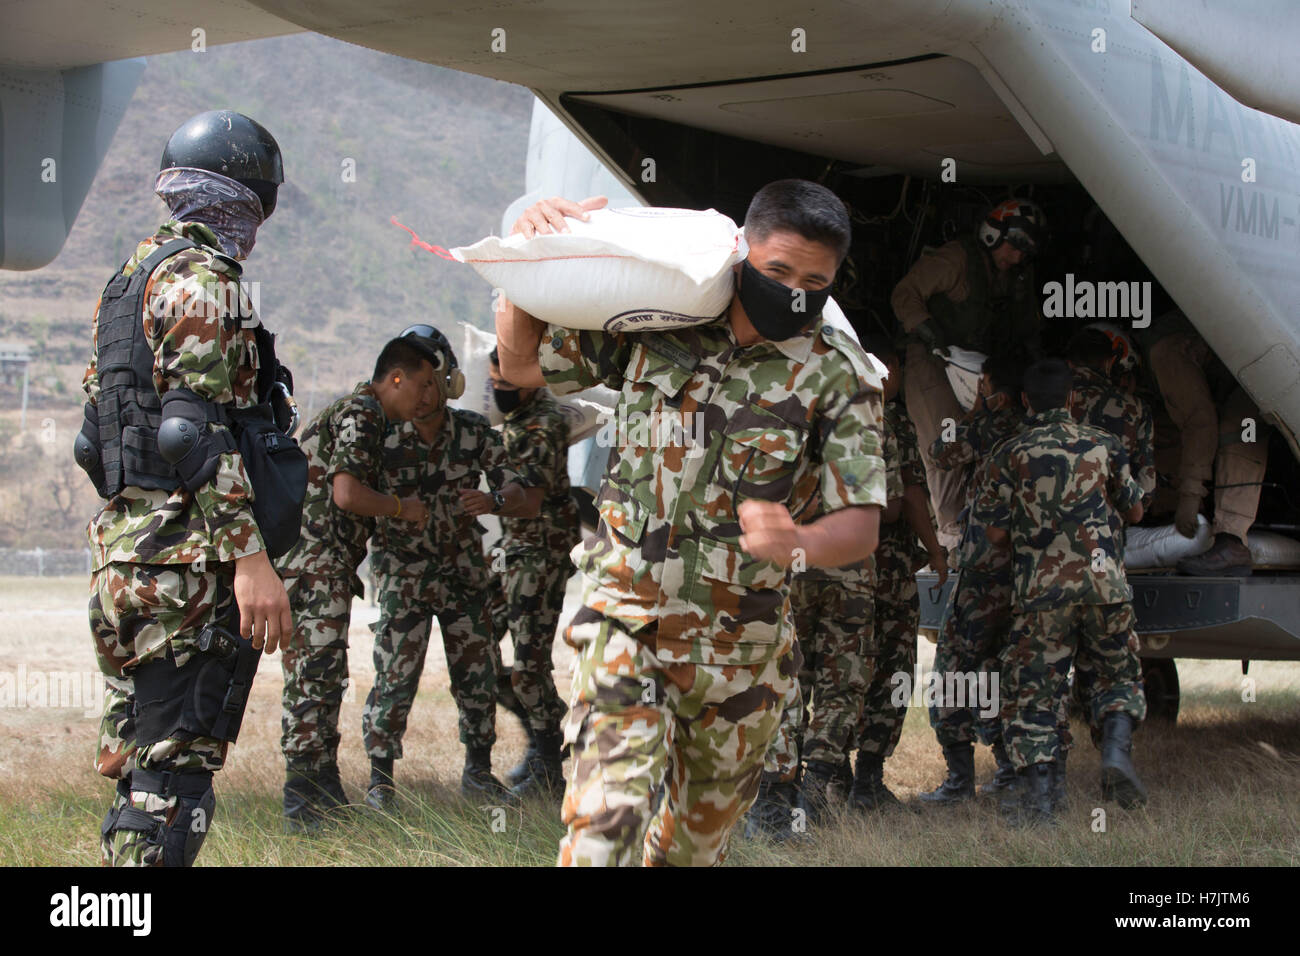 U.S. and Nepalese soldiers unload supplies from an MV-22 Osprey helicopter during a humanitarian assistance and disaster relief mission following a major earthquake May 8, 2015 in Manthali, Ramerhab District, Nepal. Stock Photo